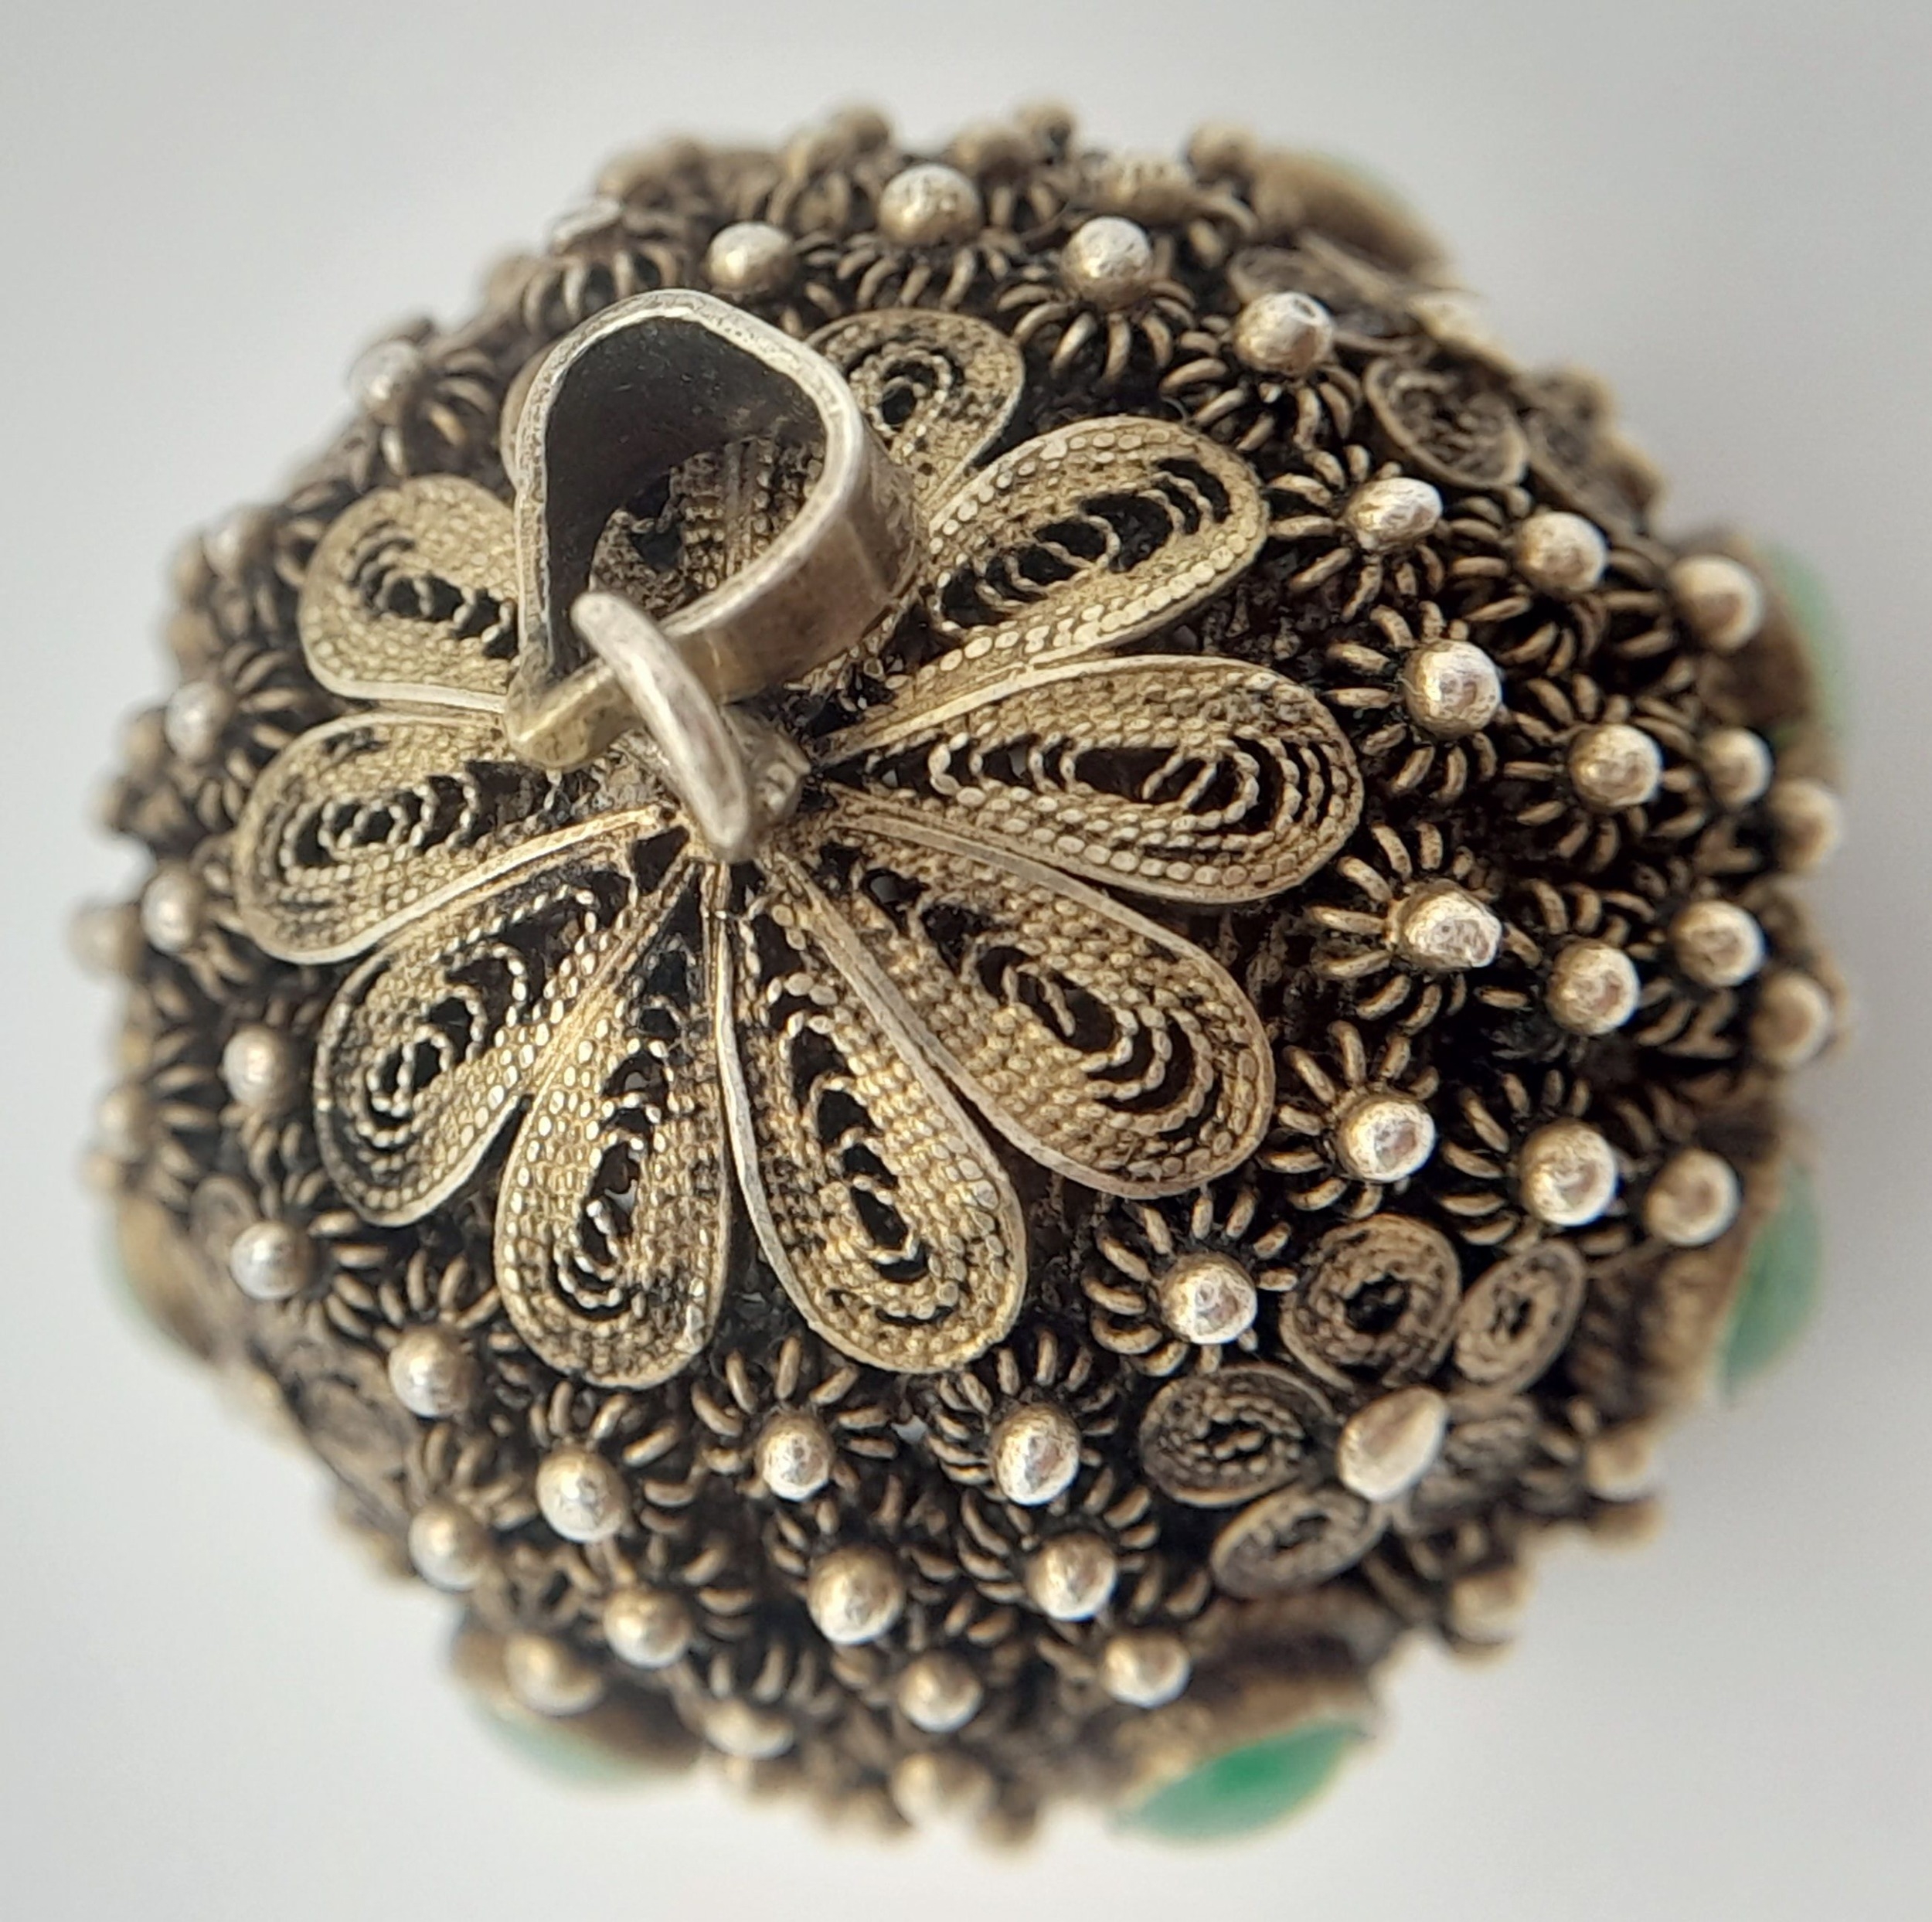 An Antique Gold Plated Silver Decorative Orb Pendant. Ornate filigree work with jade accents. 3.5cm. - Image 3 of 5